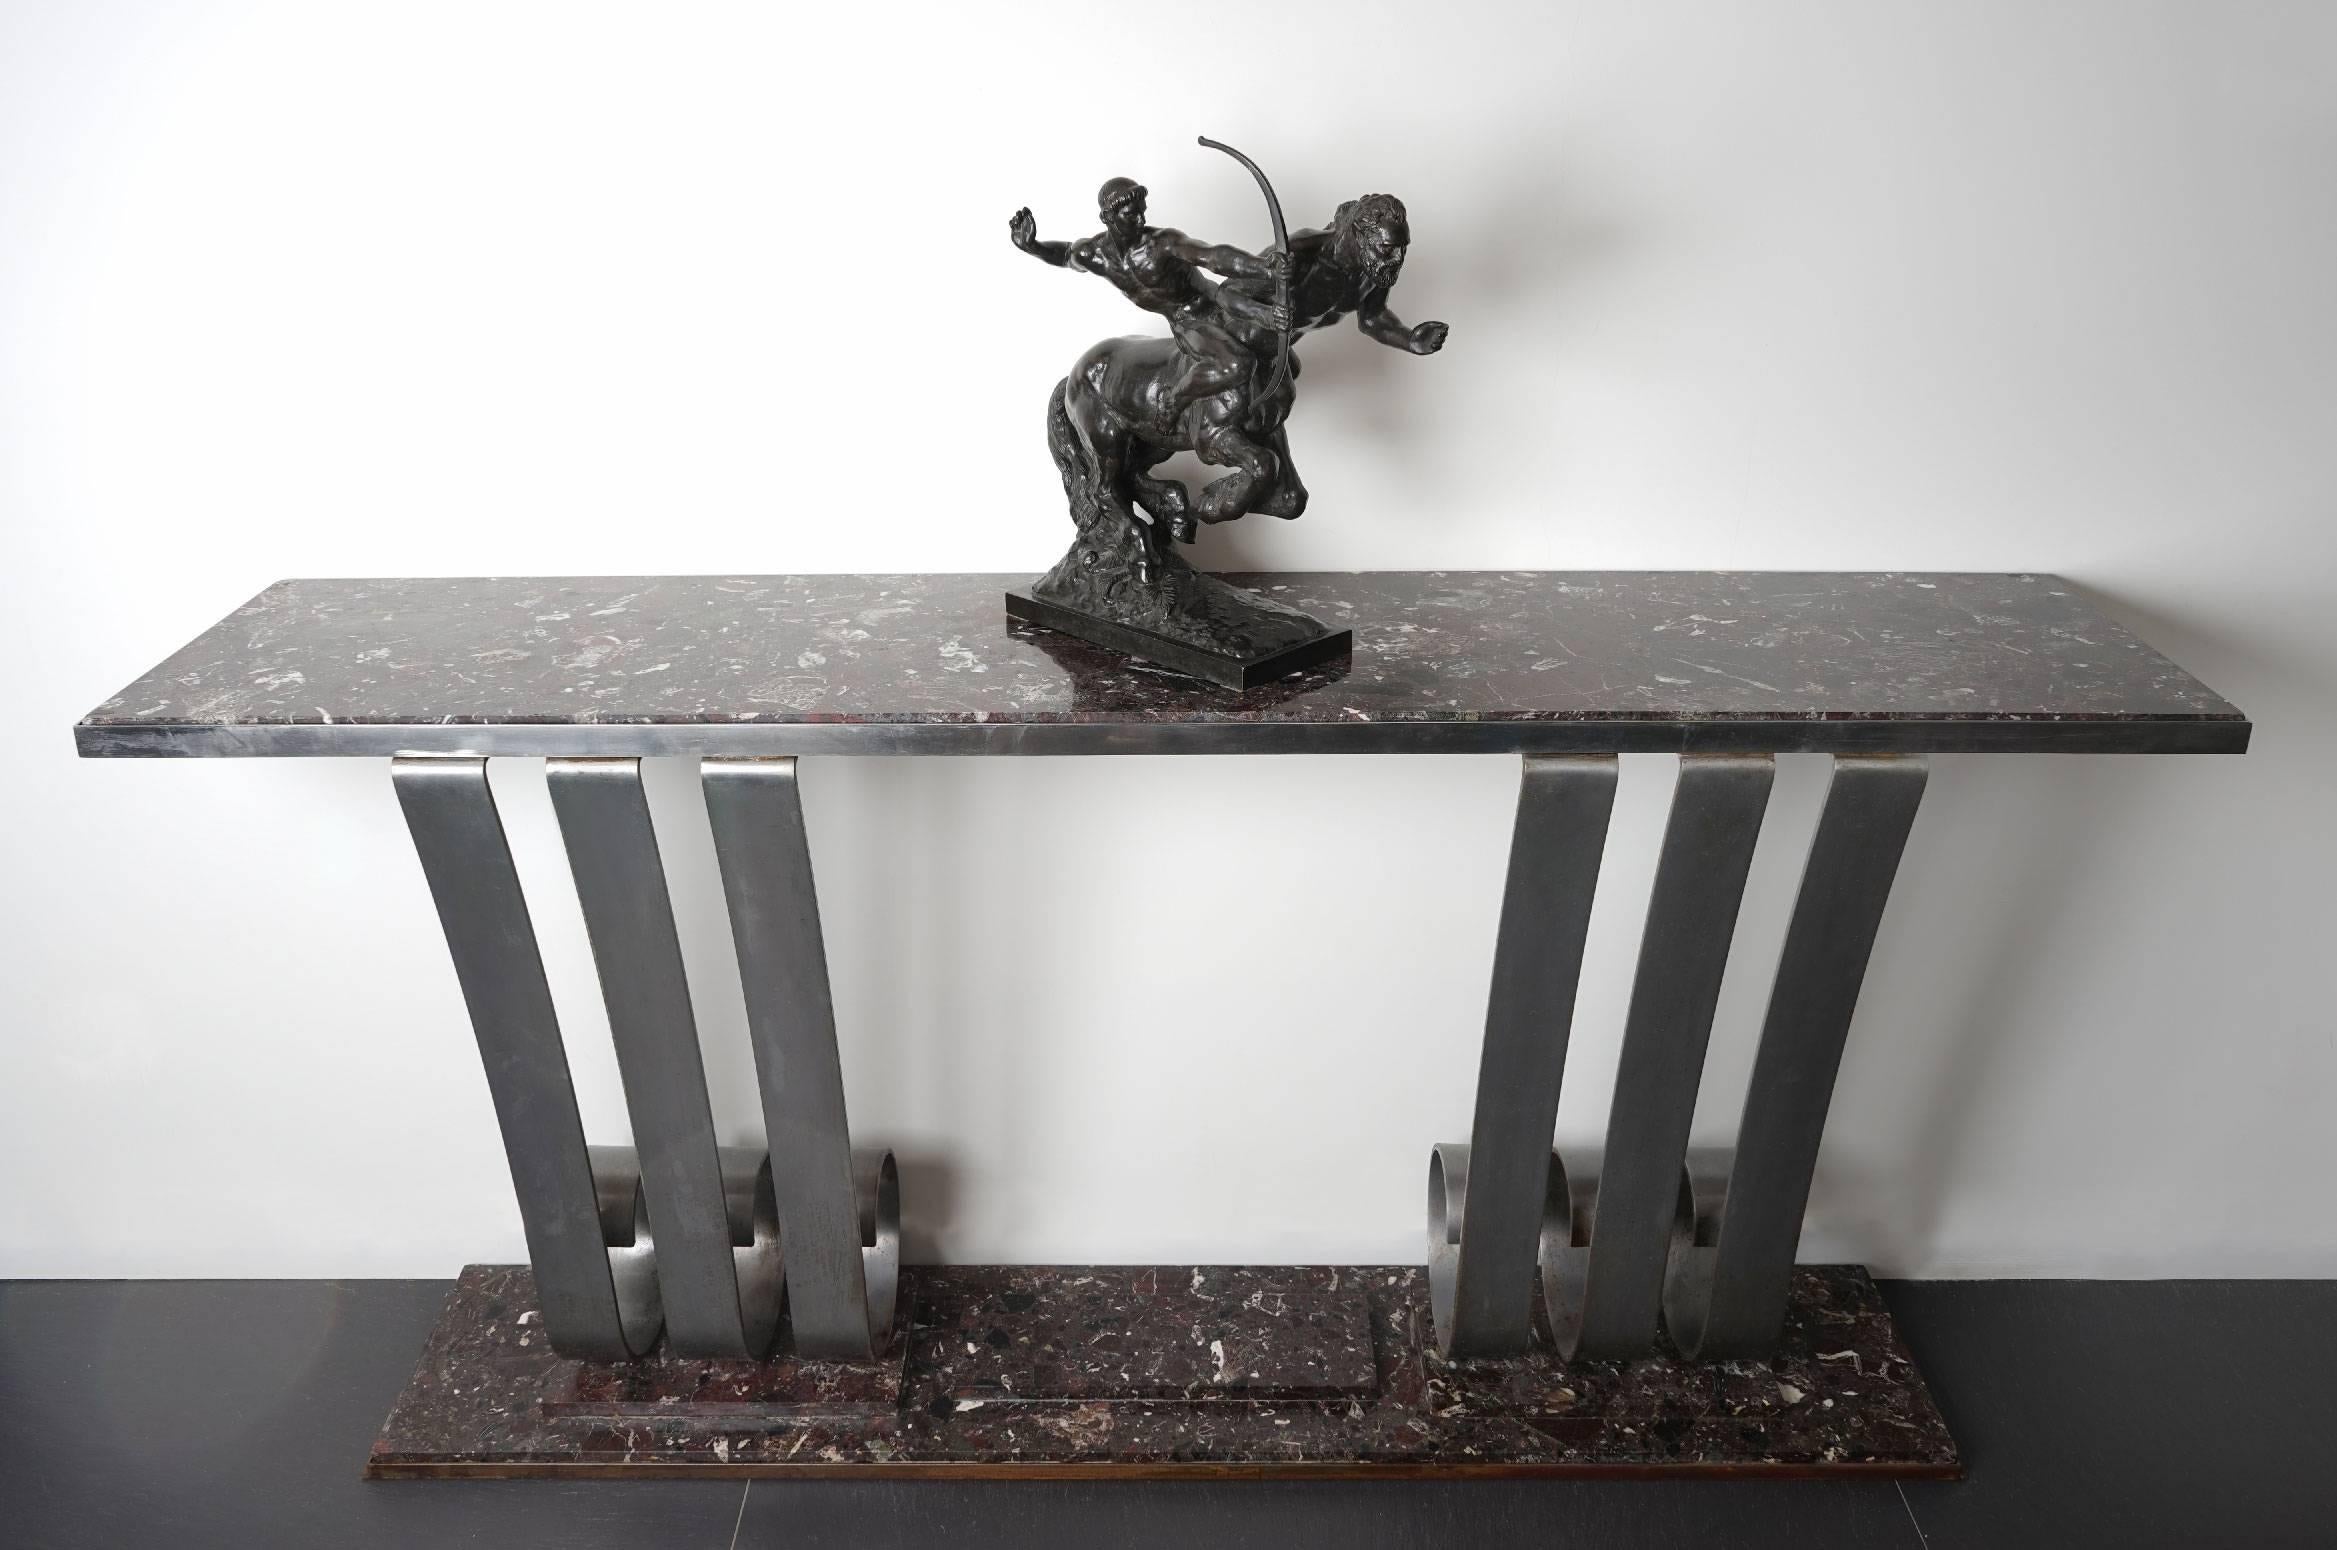 Exceptional 1940s Art Deco console by Raymond Subes
Marble base 
1940s
Dimensions: 90 x 180 x 40 cm

Raymond Subes
(1891-1970)
Raymond Subes is one of the most renowned French metalworkers of the Art Deco period. His notoriety as an